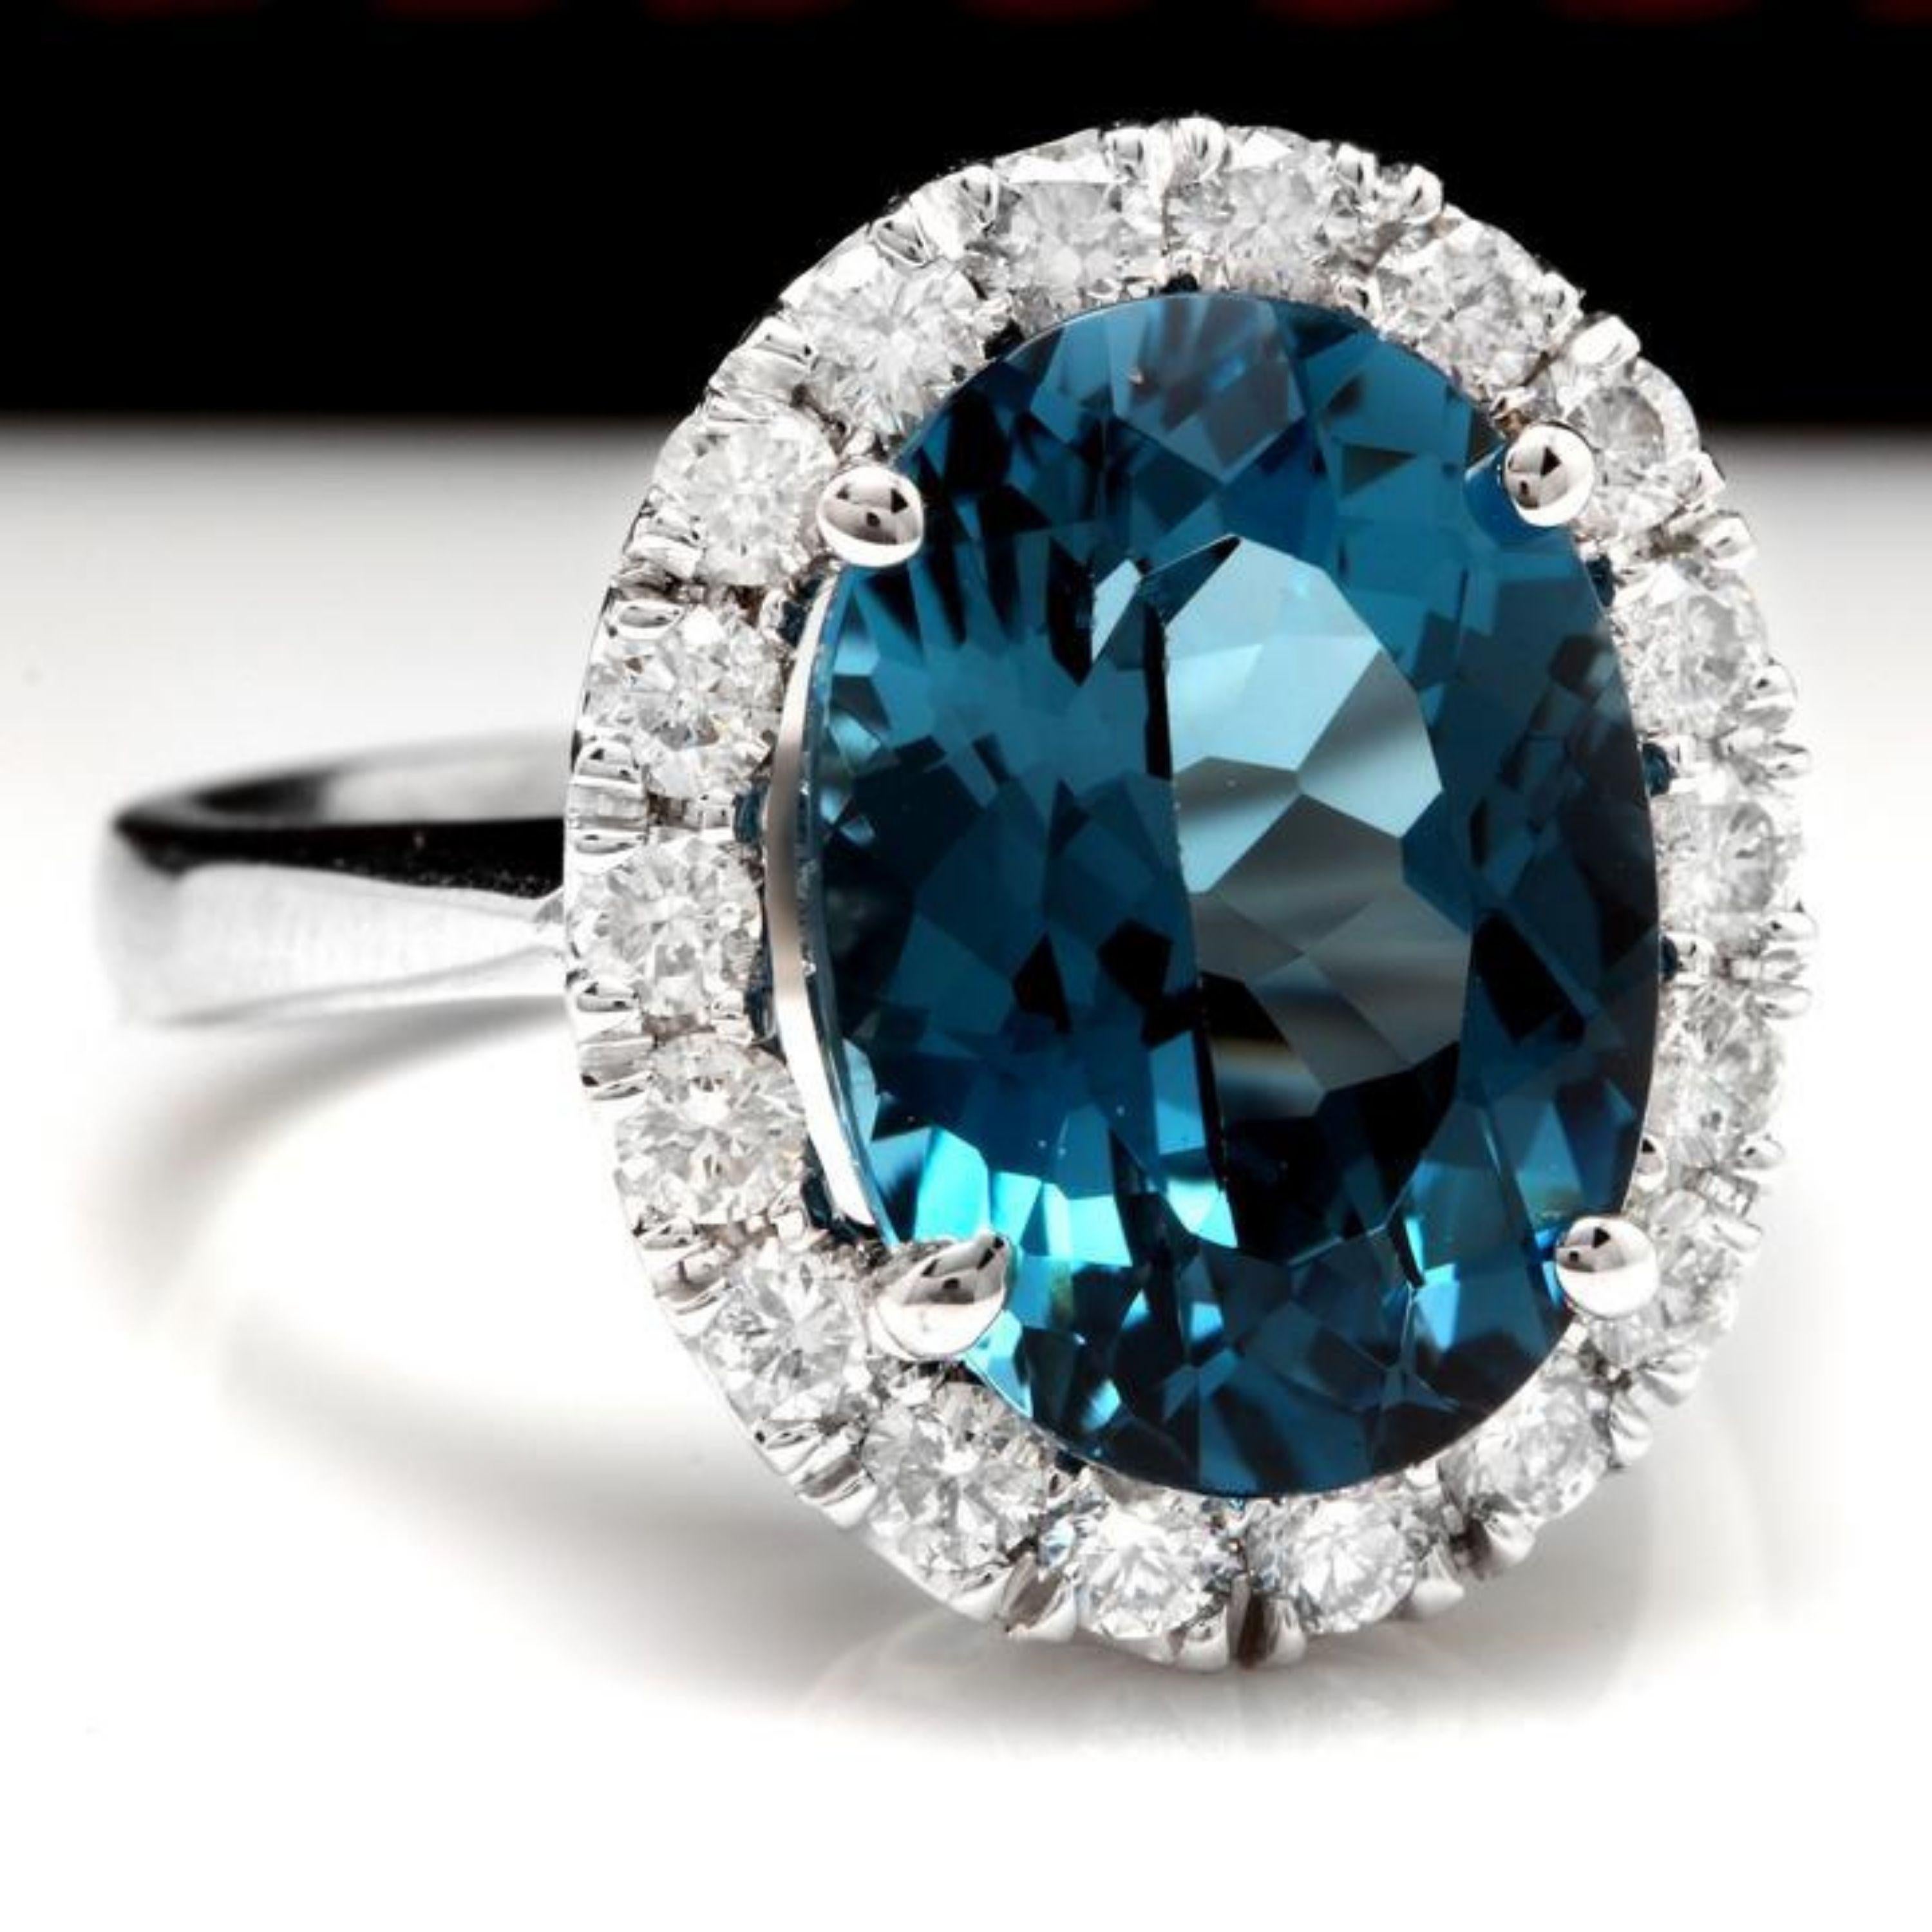 9.90 Carats Natural Impressive London Blue Topaz and Diamond 14K White Gold Ring

Total Natural London Blue Topaz Weight: 9.00 Carats

London Blue Topaz Measures: 14.00 x 10.00mm

London Blue Topaz Treatment: Heat / Irradiation

Natural Round